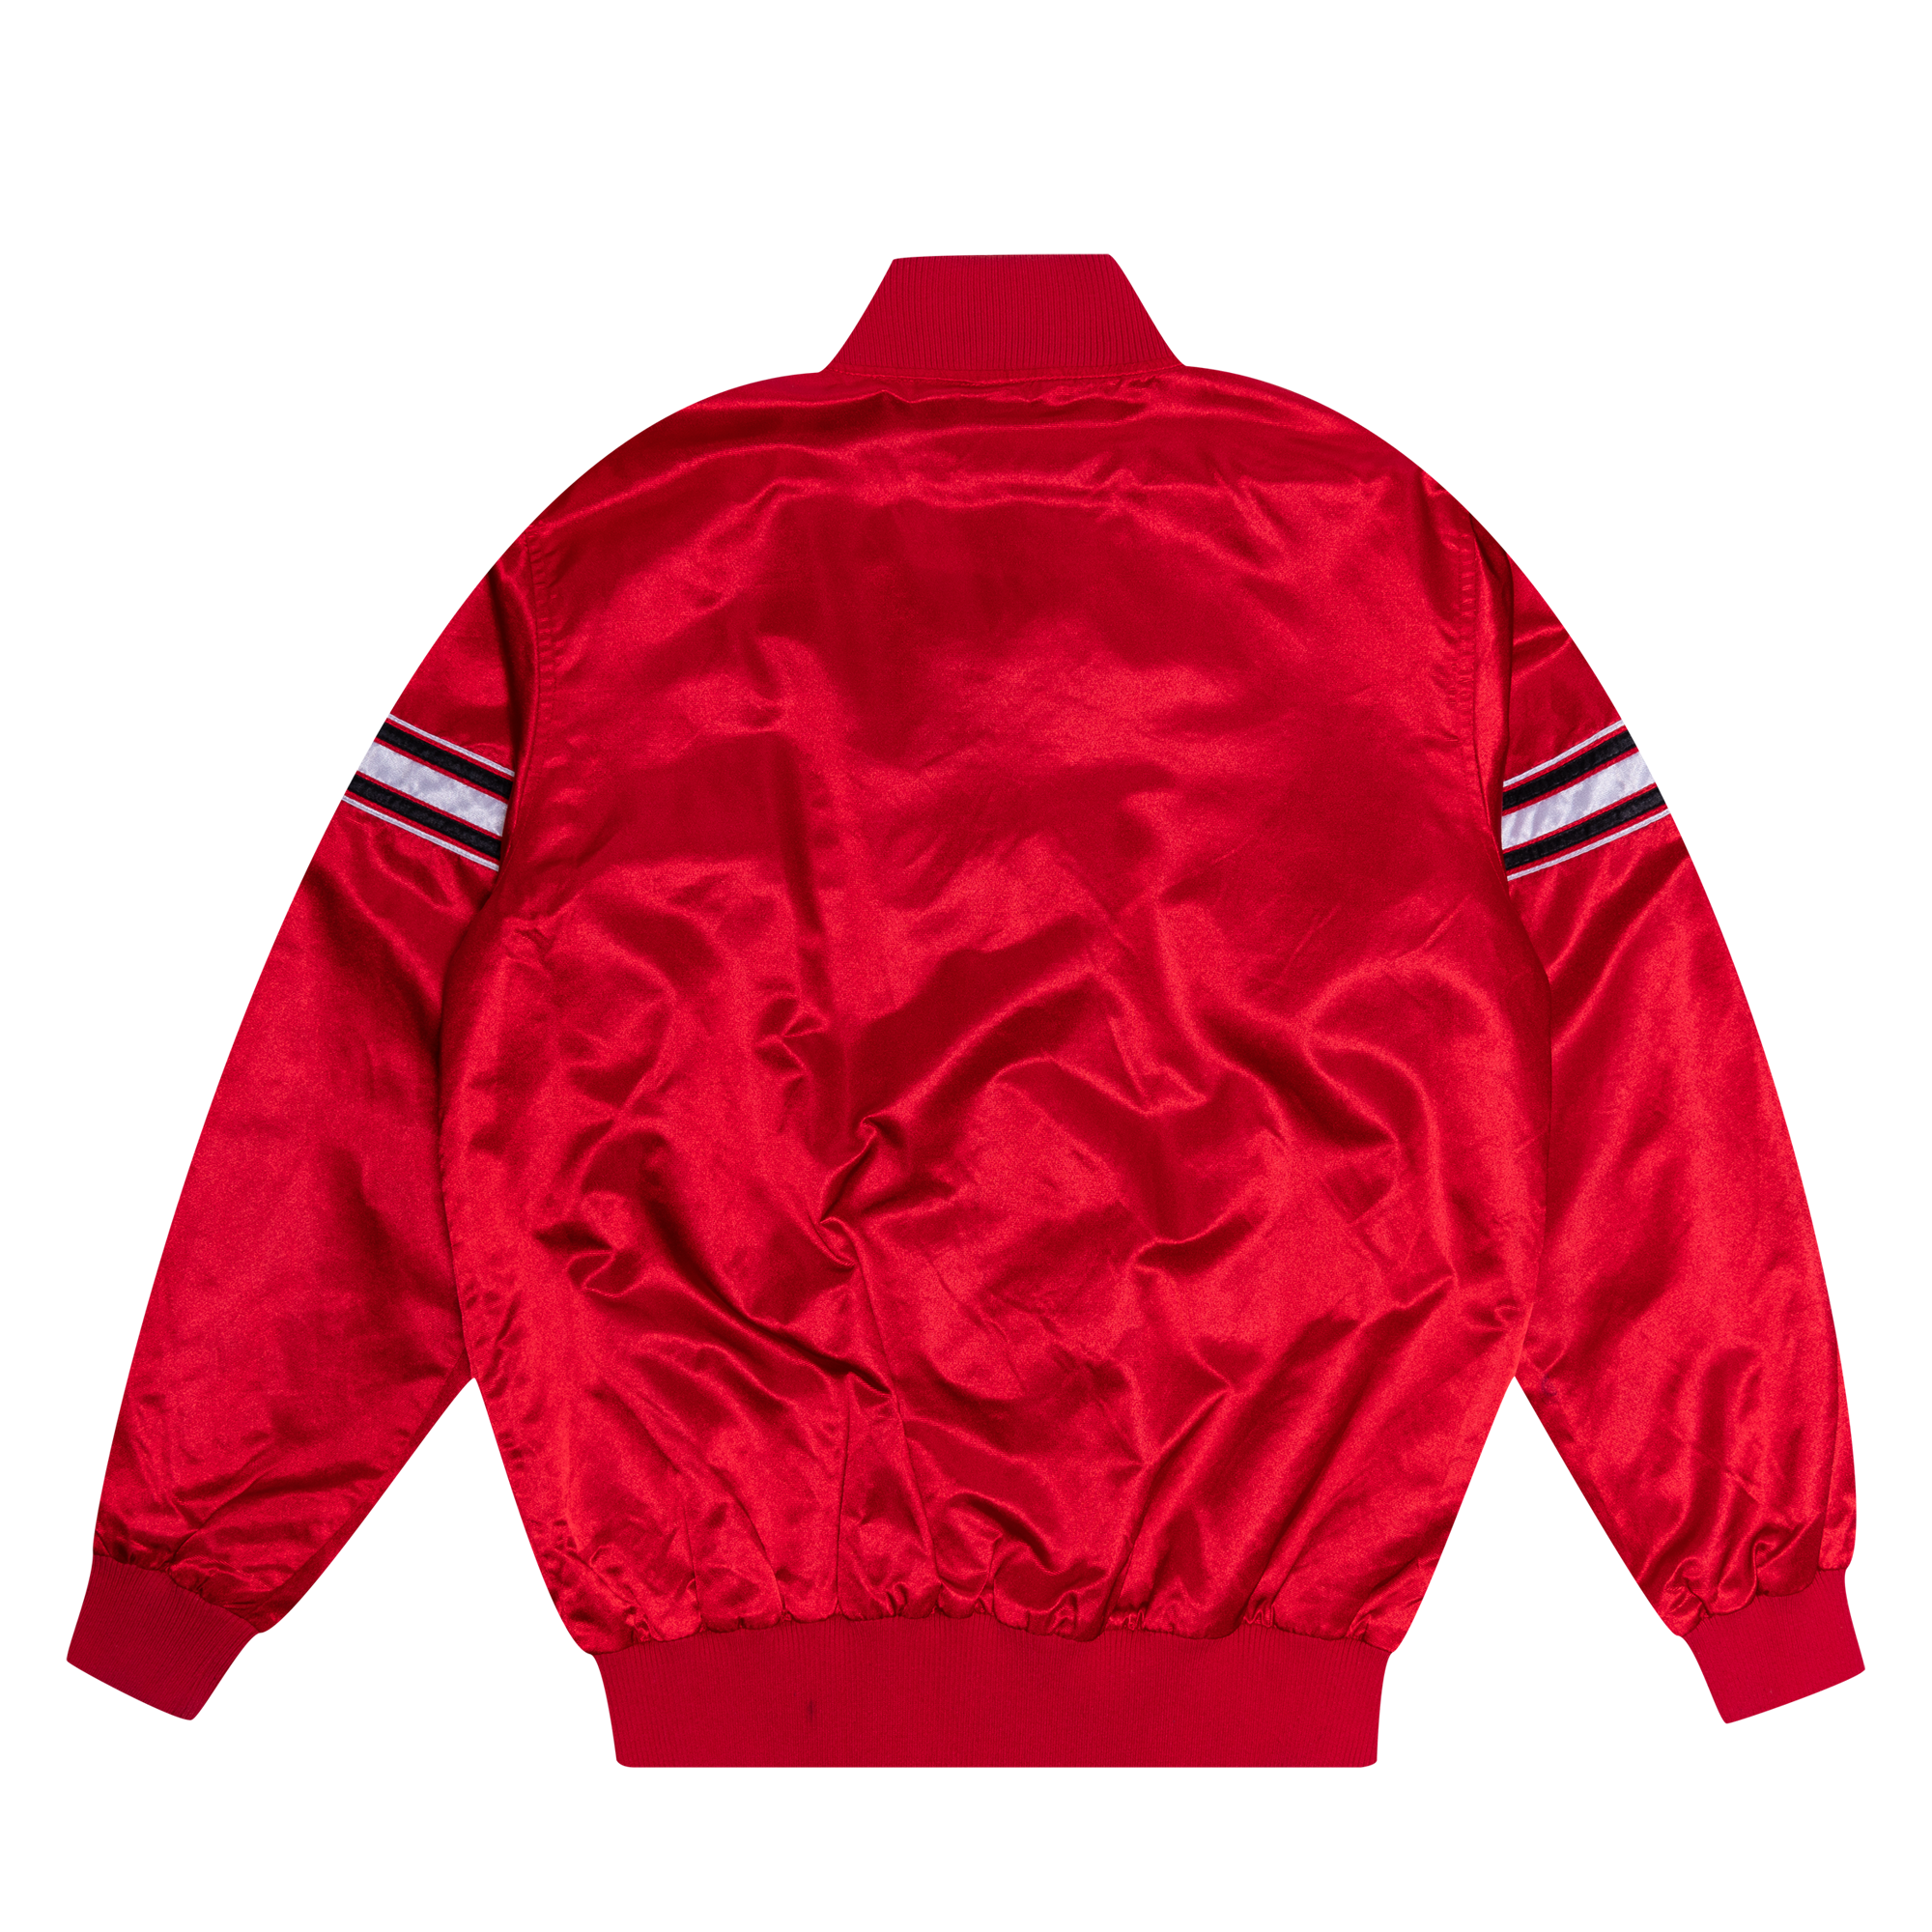 Chicago Bulls Embroidered Starter Striped Sleeve NBA Jacket Red-PLUS